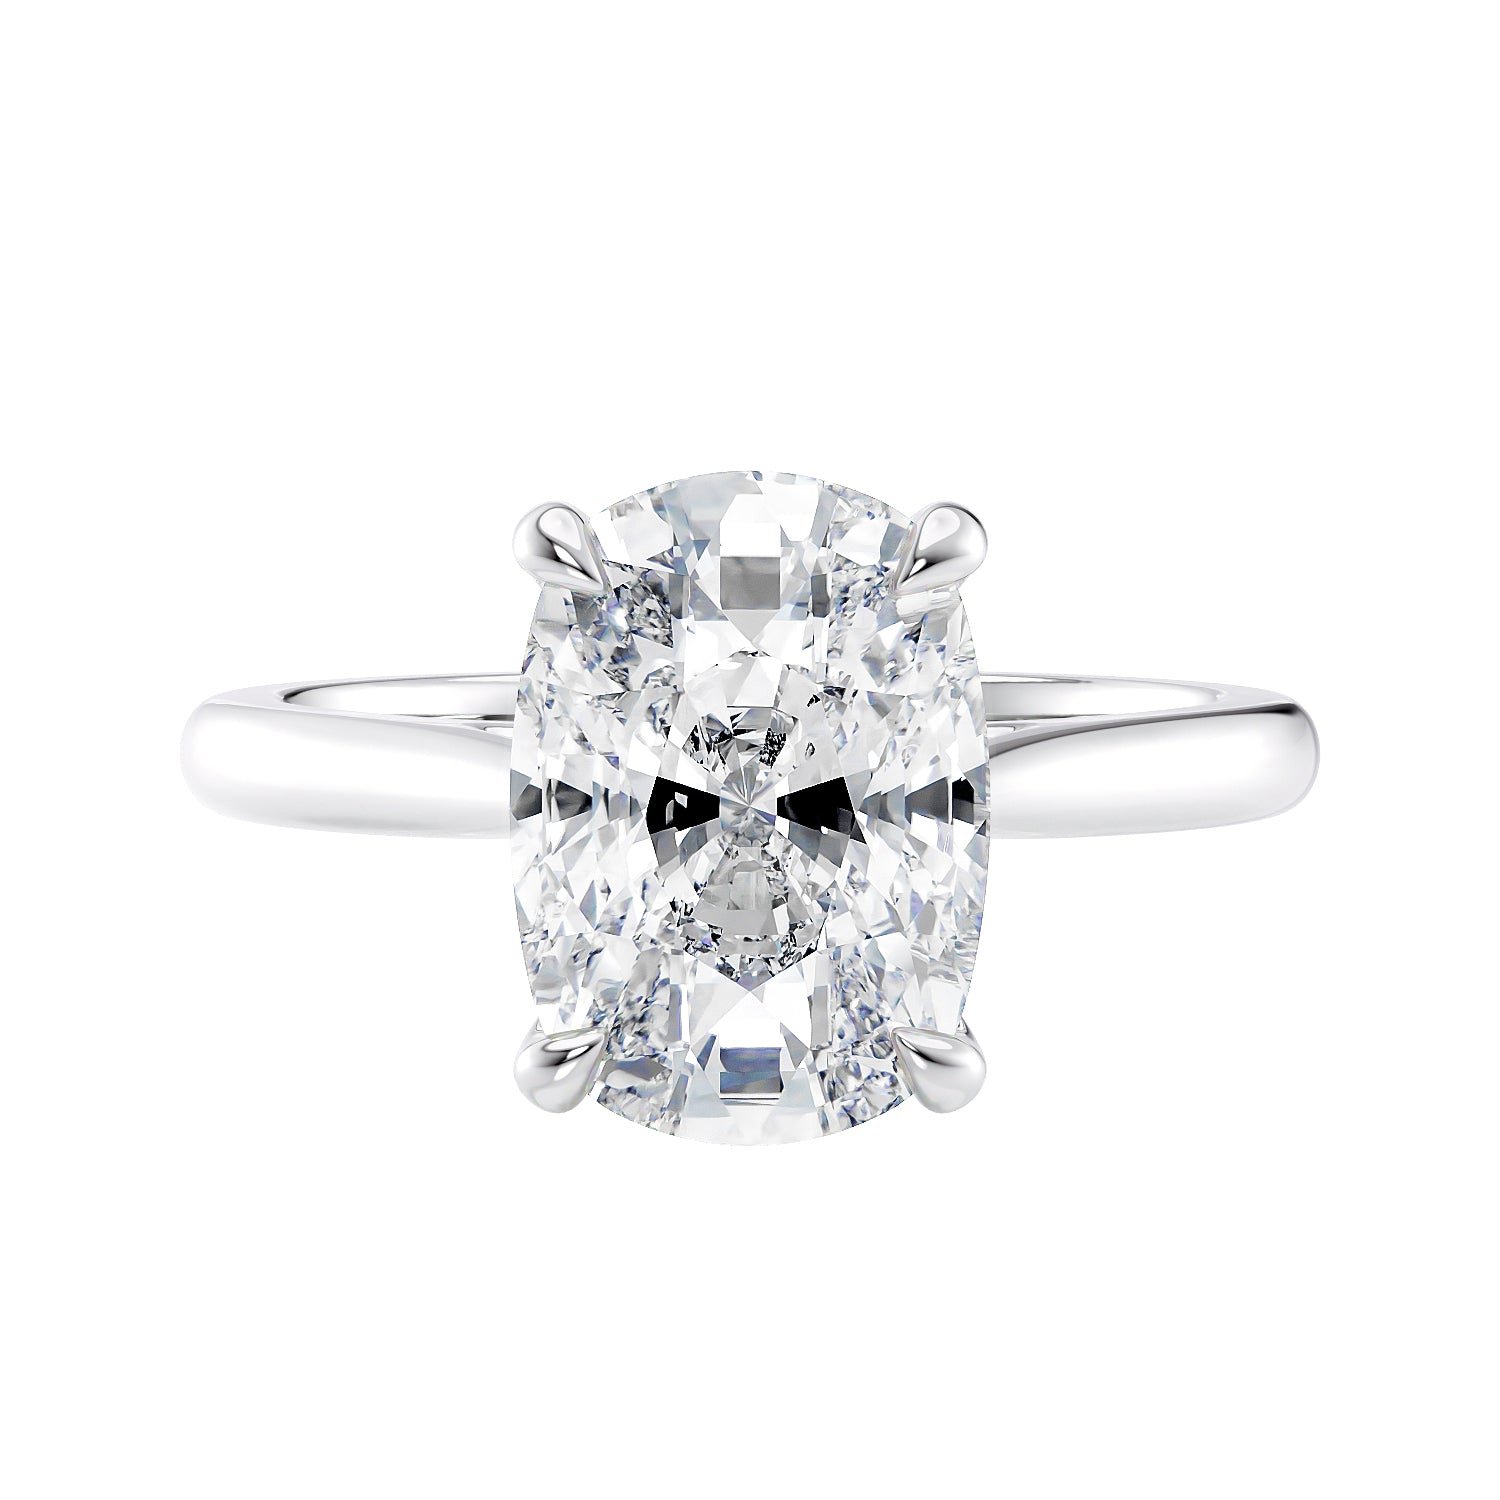 Elongated cushion cut solitaire diamond engagement ring front view.